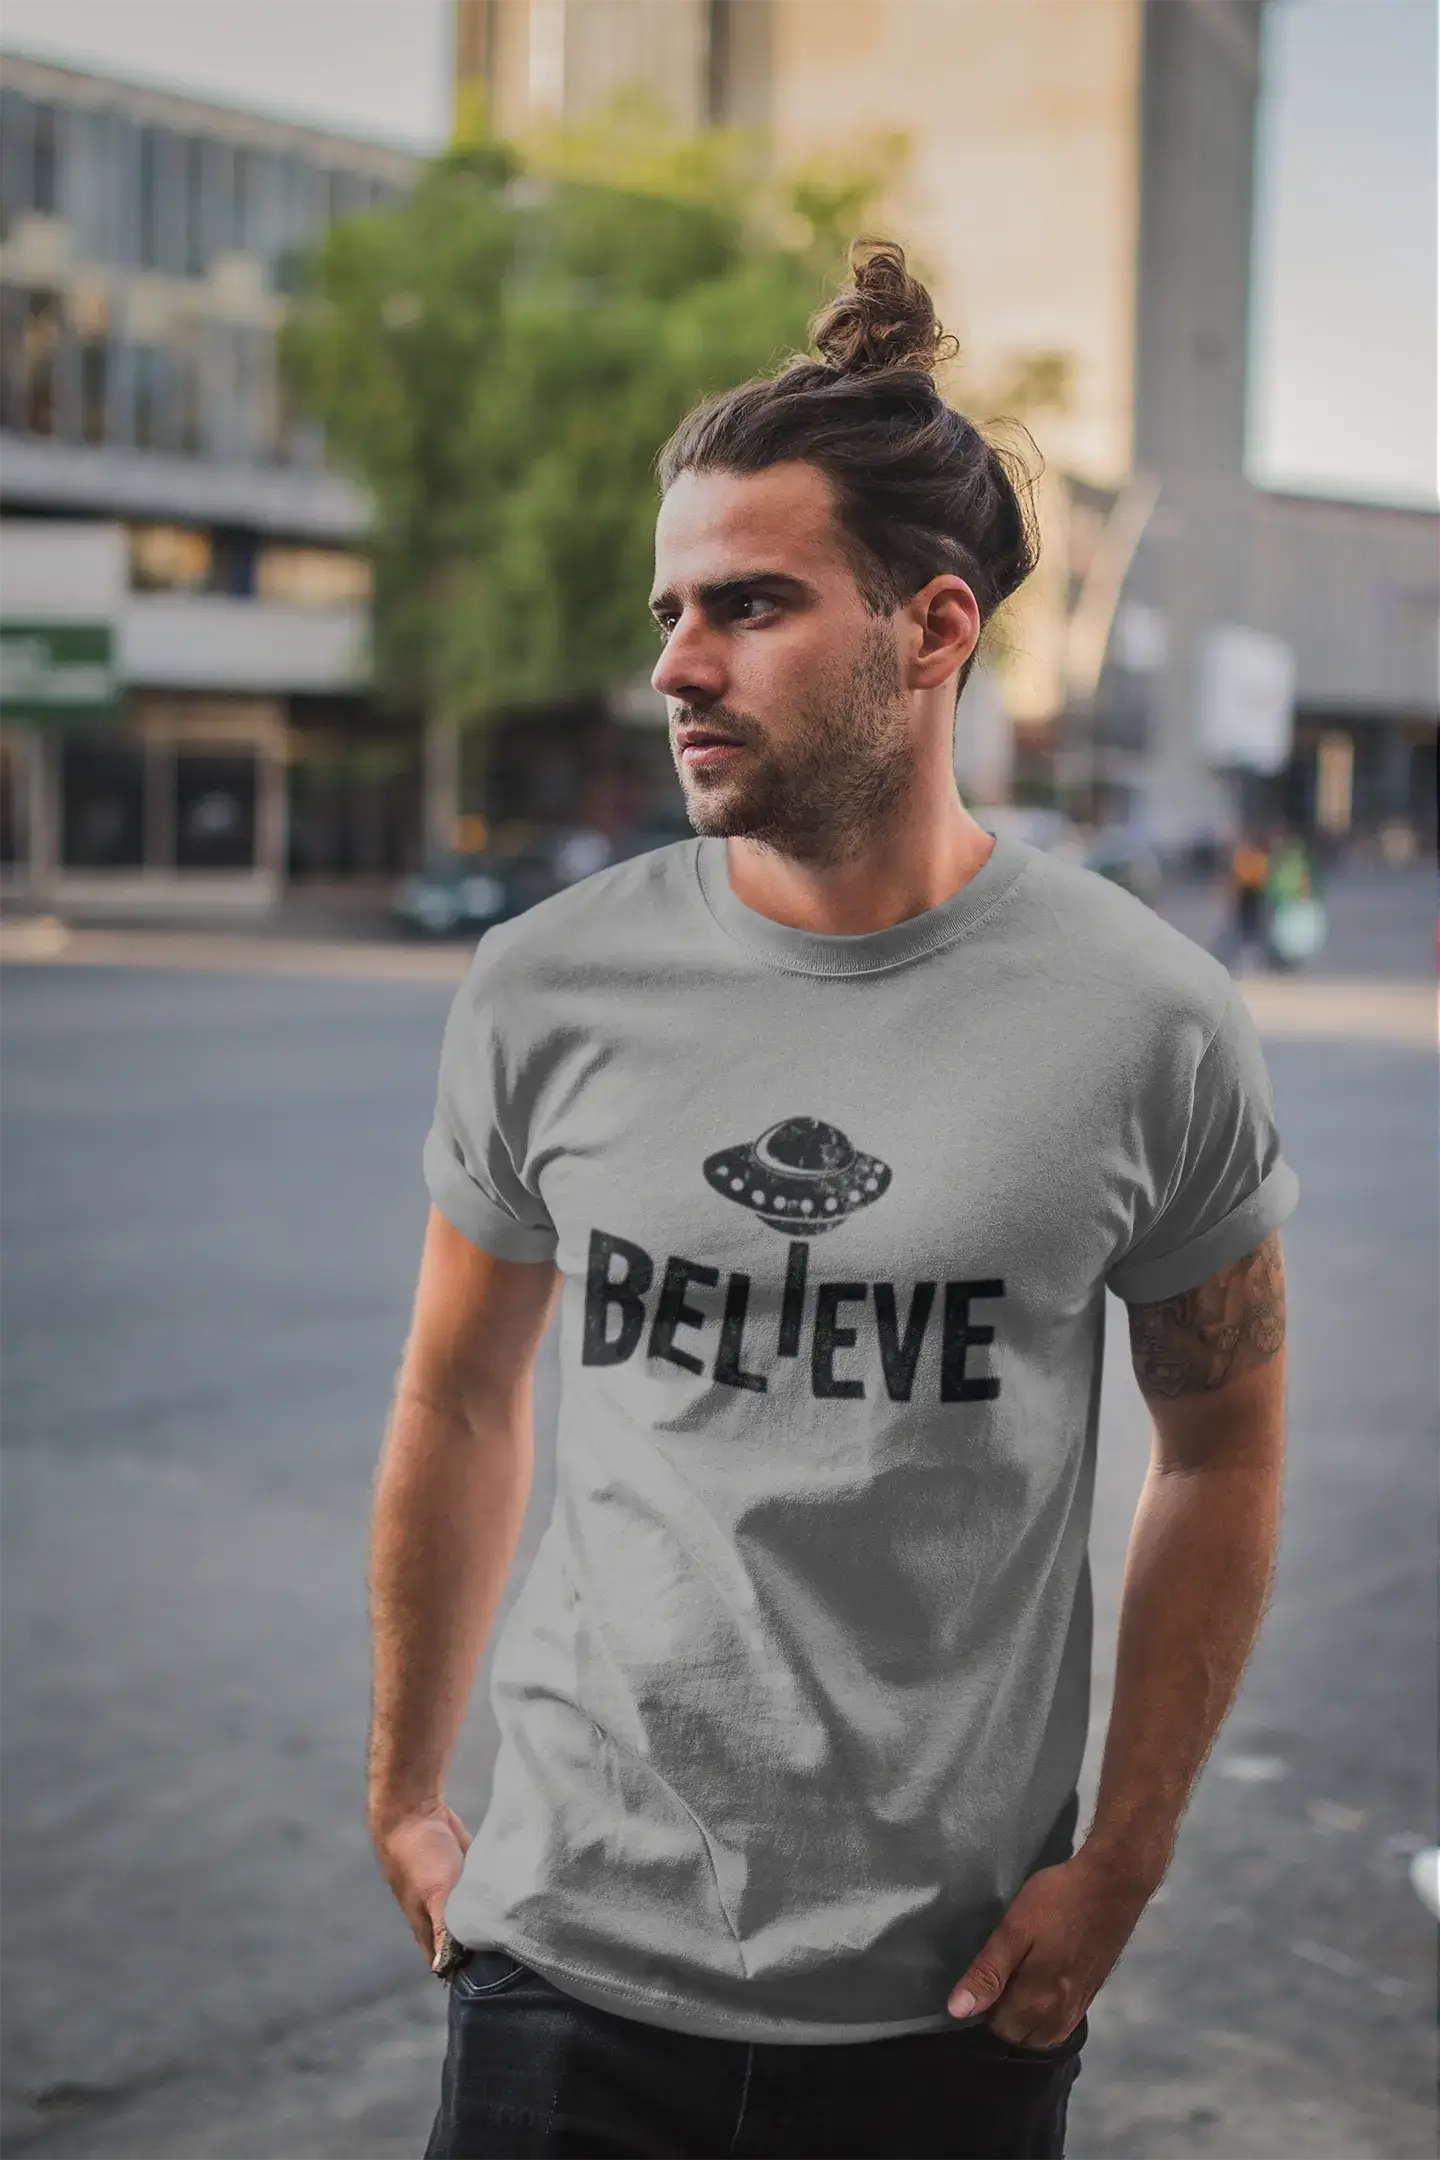 ULTRABASIC - Graphic Men's Believe UFO Alien T-Shirt Funny Casual Letter Print Tee French Navy